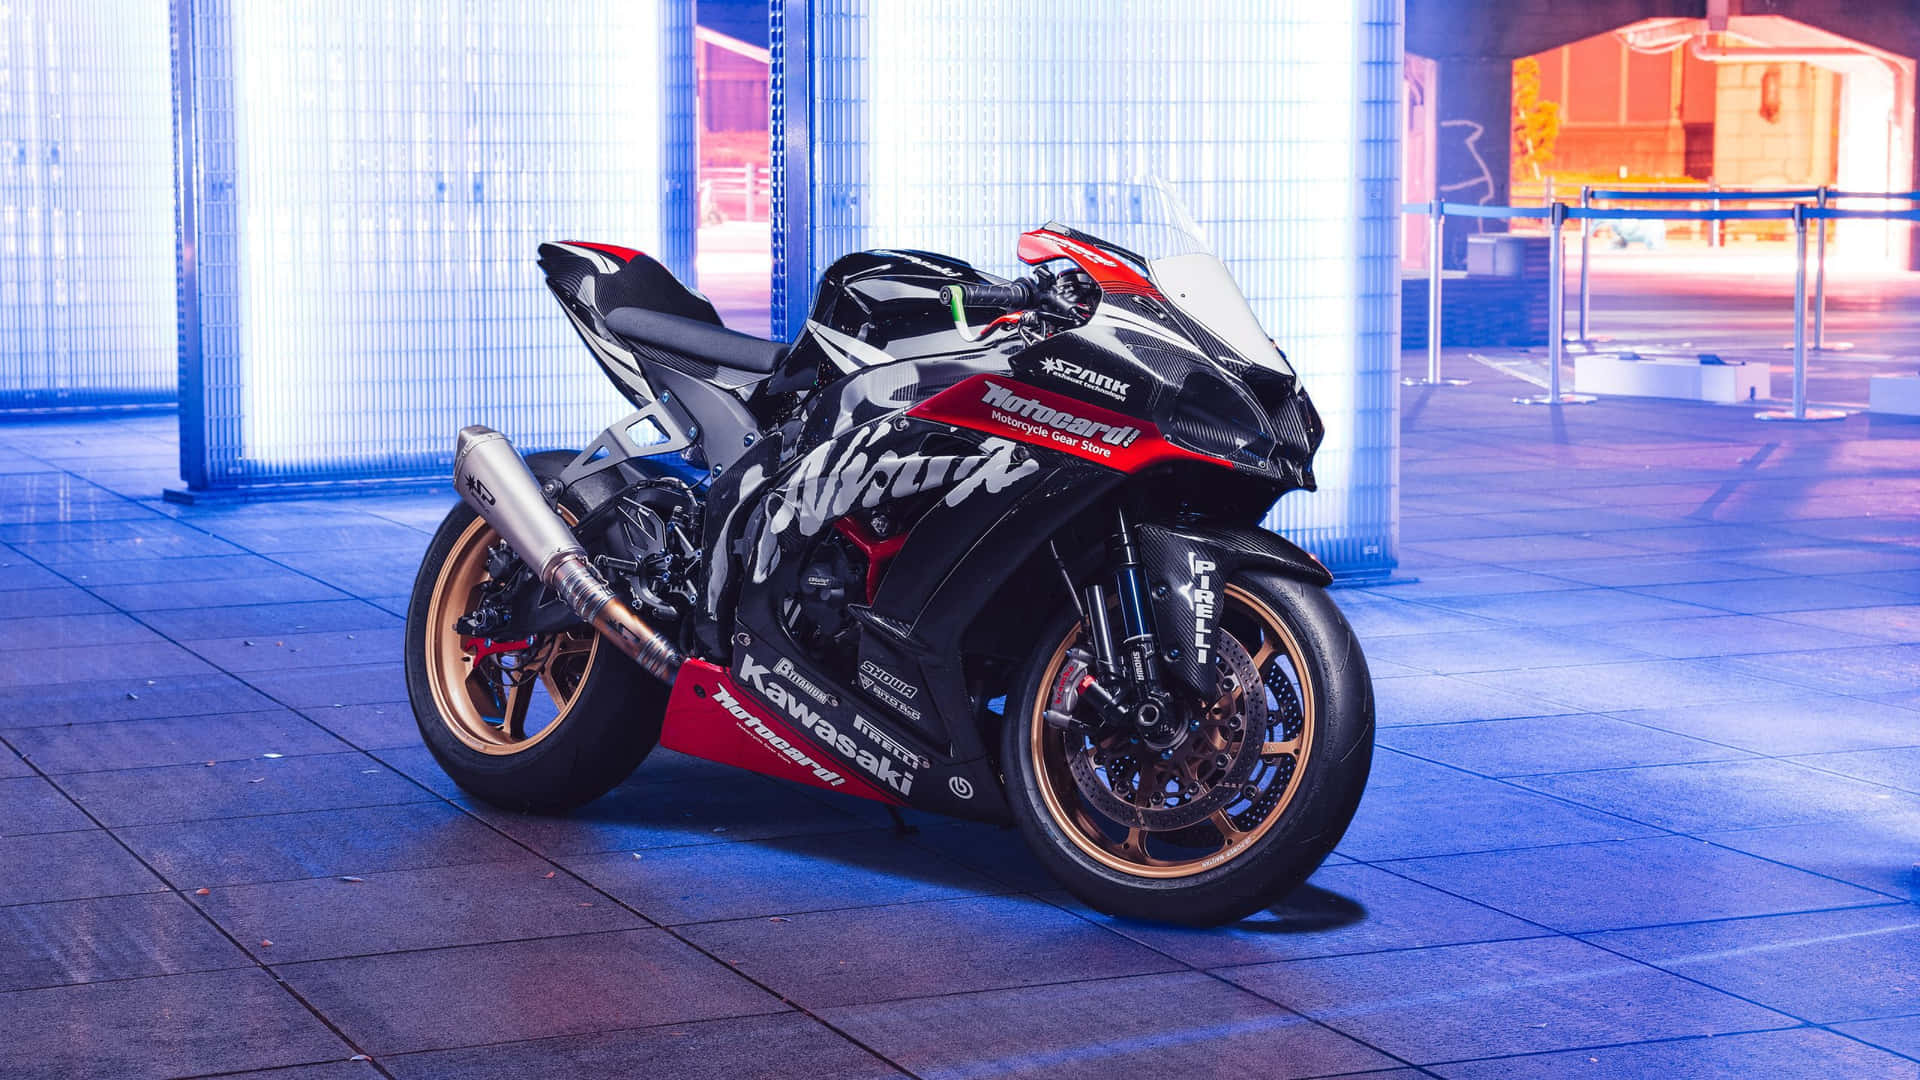 Speed takes on a whole new meaning with this intense, street-legal superbike